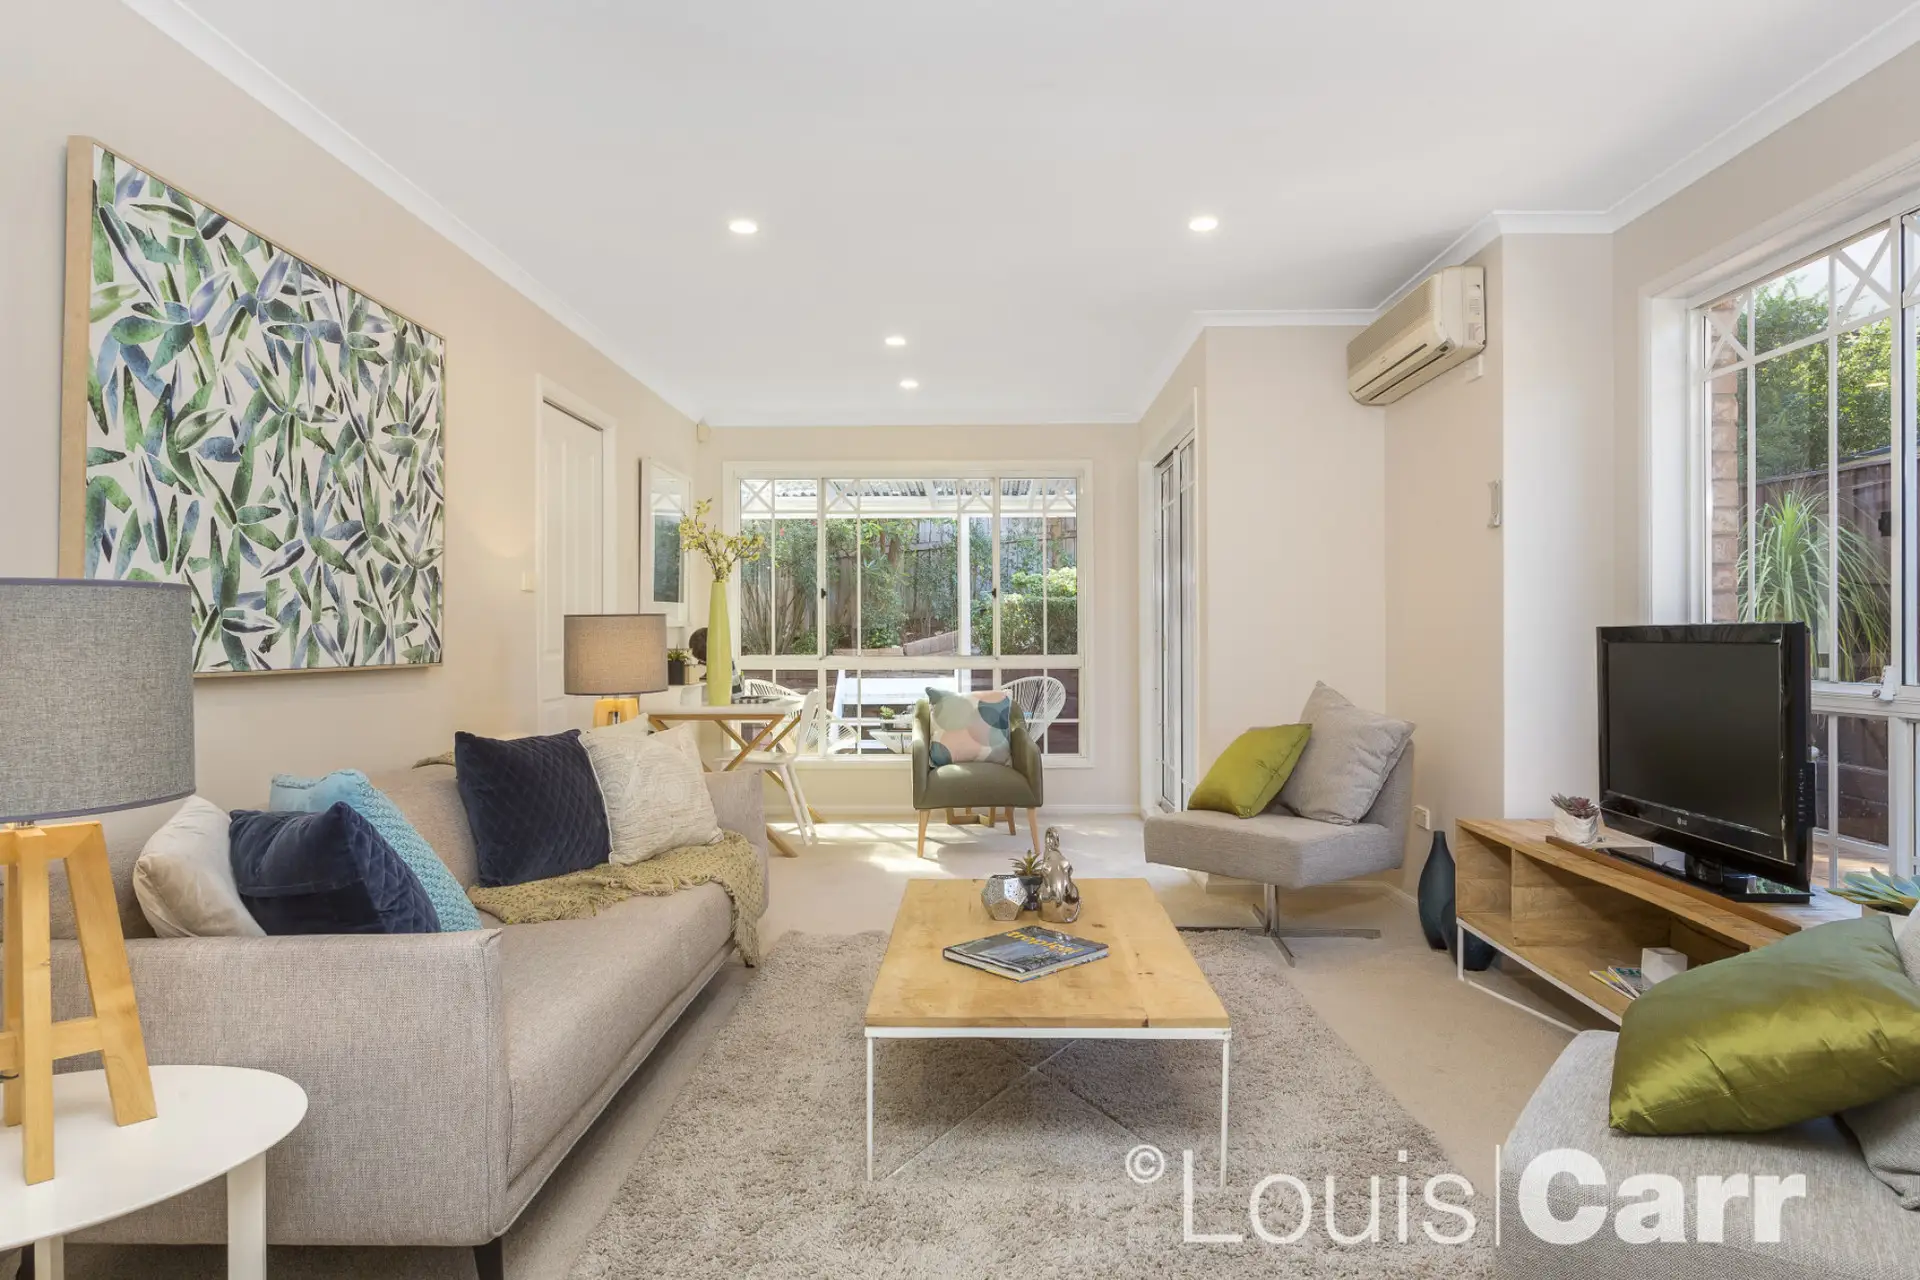 Photo #2: 17 Tennyson Close, Cherrybrook - Sold by Louis Carr Real Estate